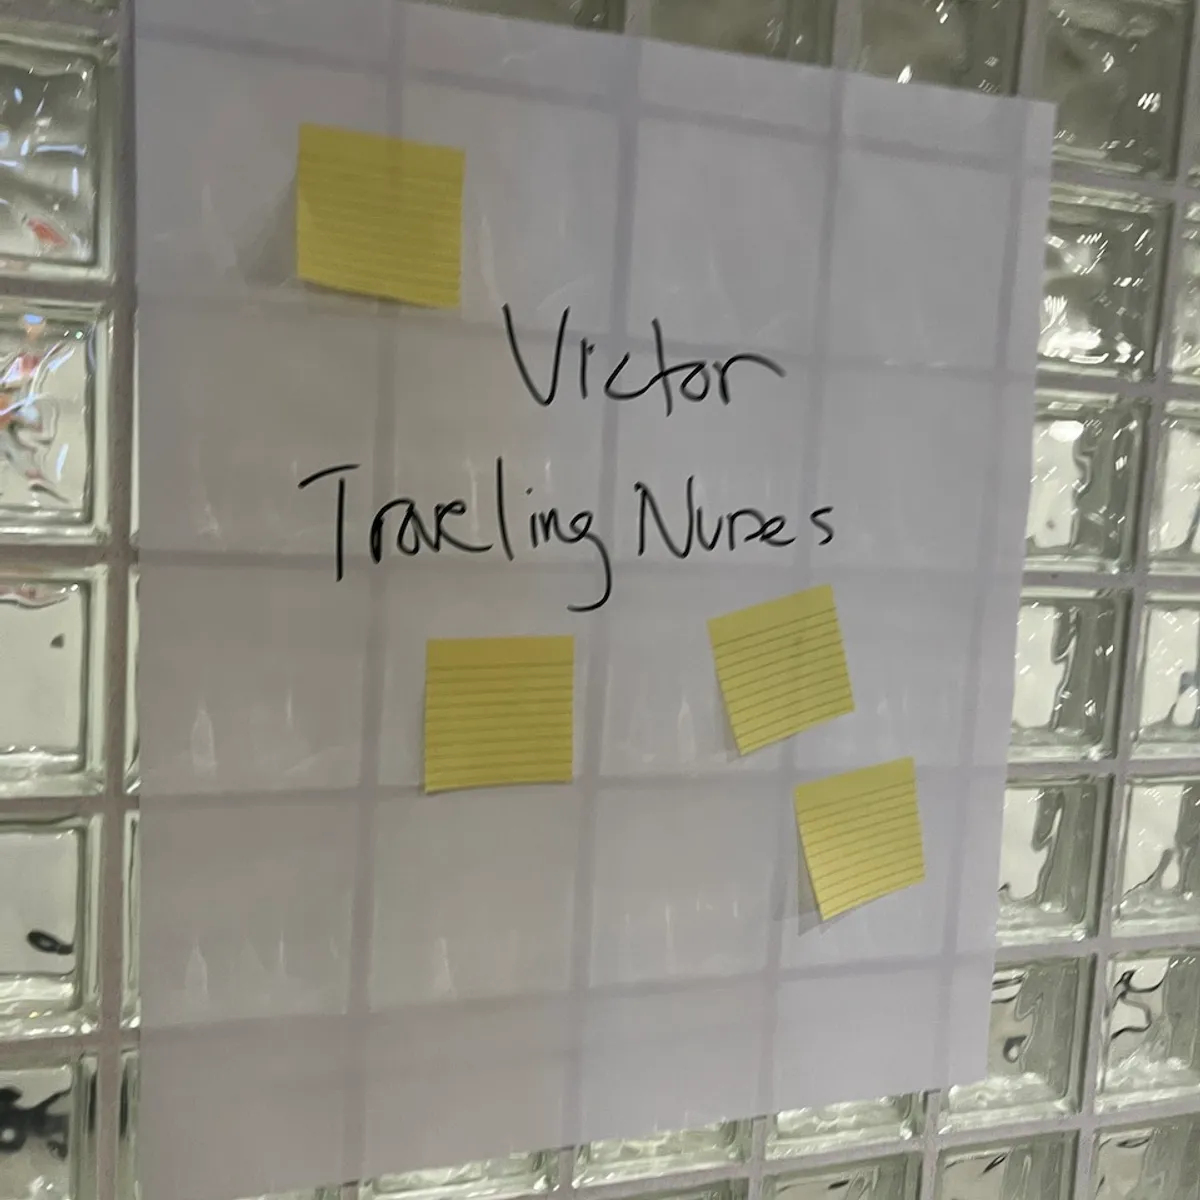 The 'traveling nurses' tailored idea I presented received four votes on a poster